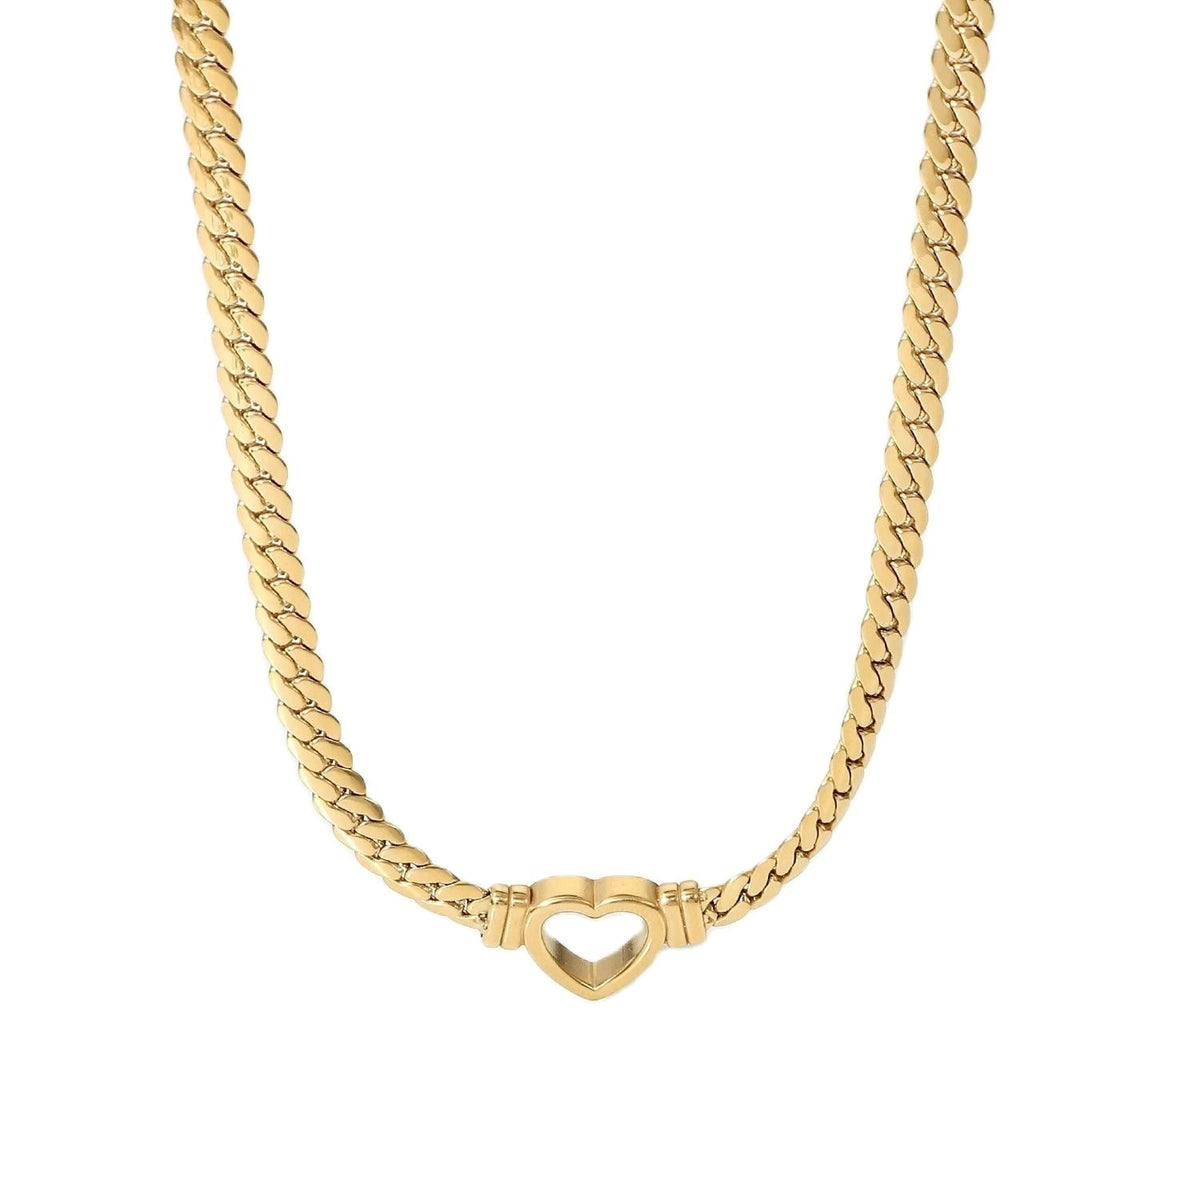 Casual Style 18K Real Gold Layered Stainless Steel Cuban Link Heart Chain For Women Waterproof Necklace Girlfriend Gift